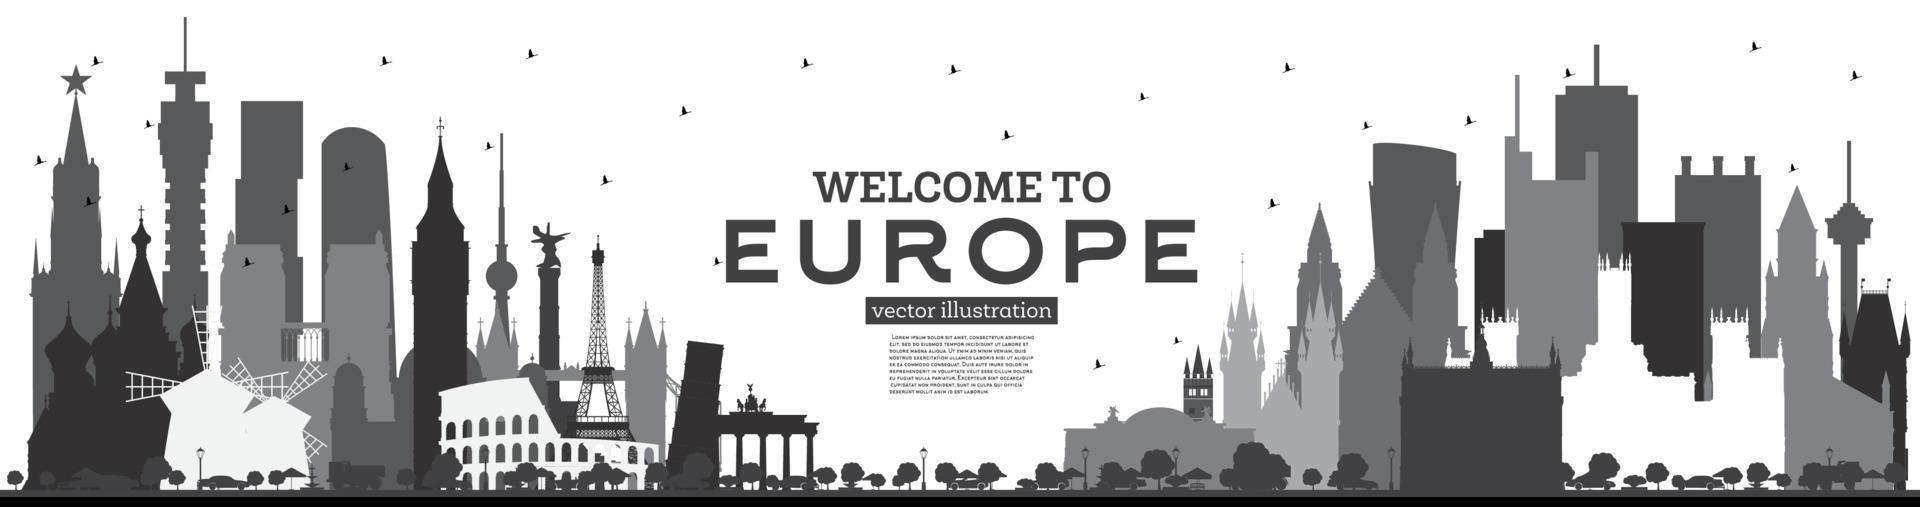 Welcome to Europe Skyline Silhouette with Black Buildings Isolated on White. vector